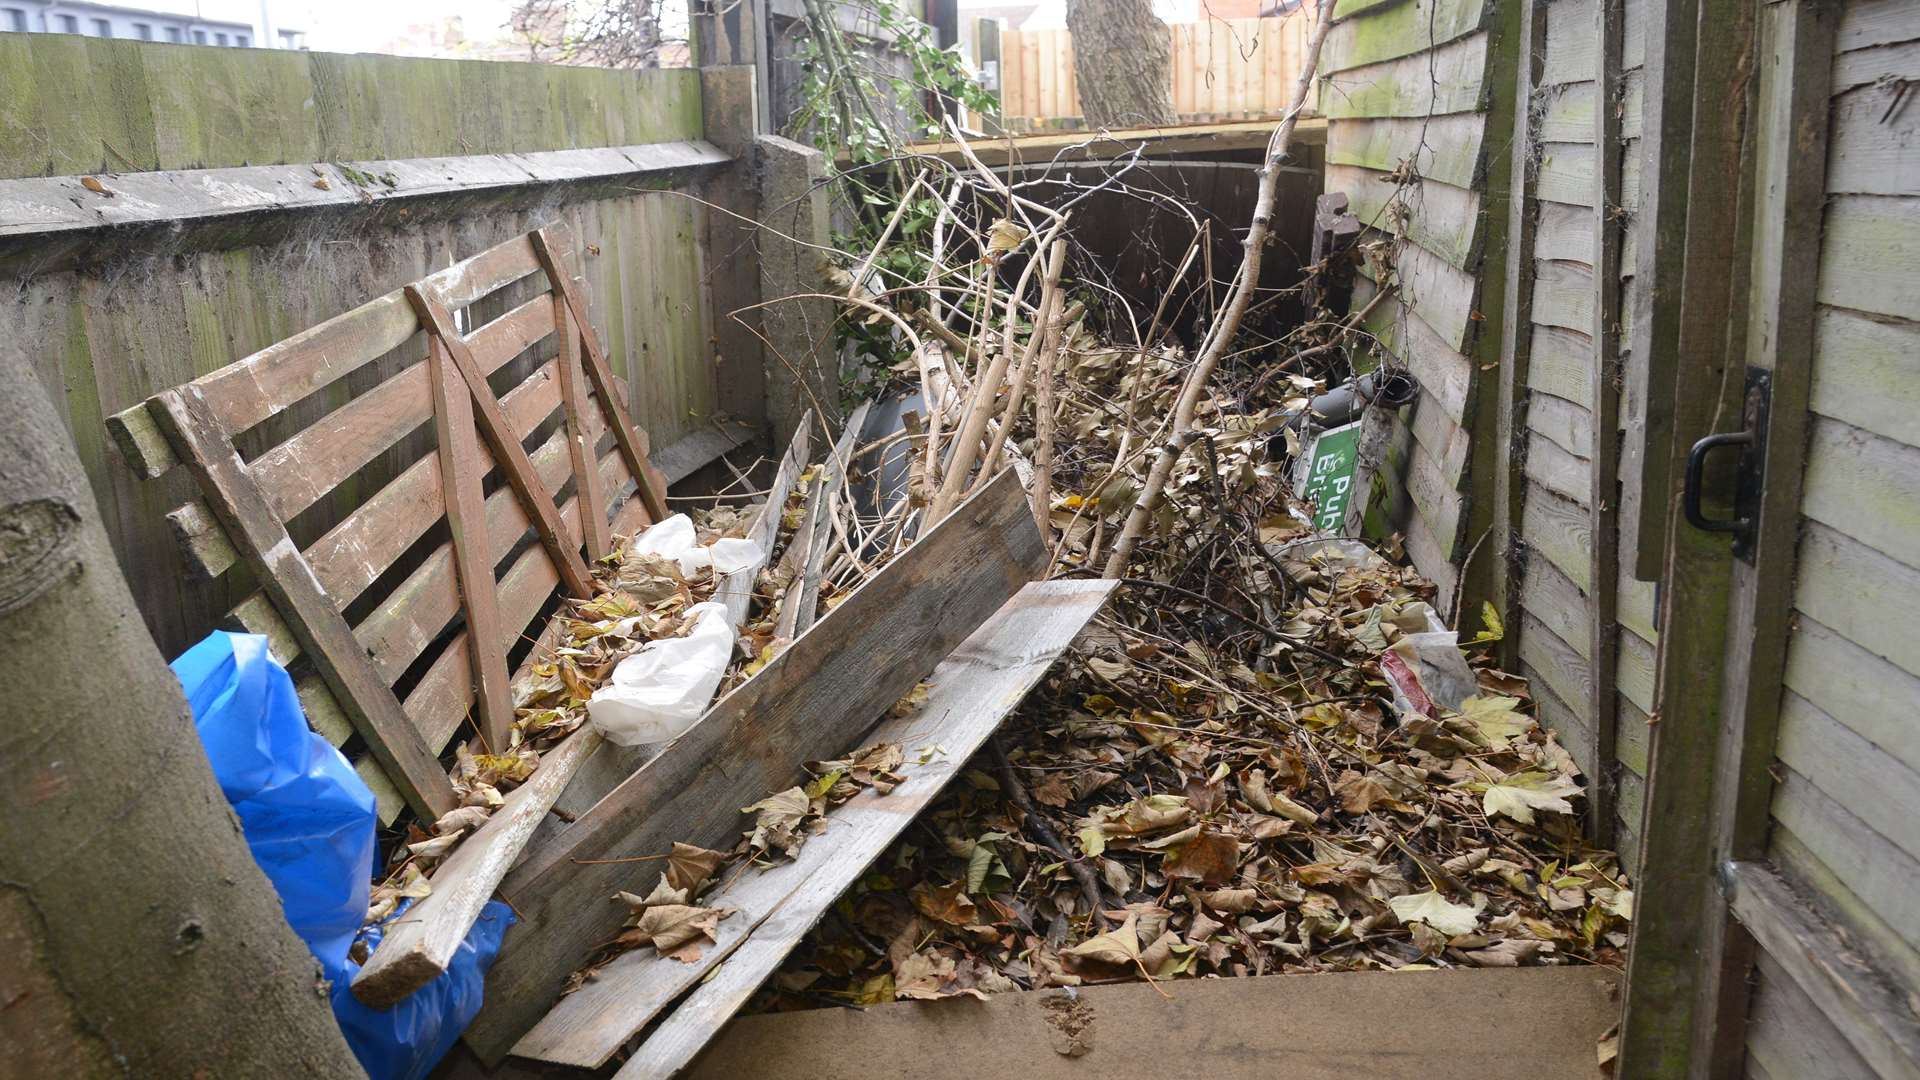 Nayelli Navarro has called the council hypocritical due to rubbish and damaged and neglected fence in the alley way separating houses from the Pound Lane car park